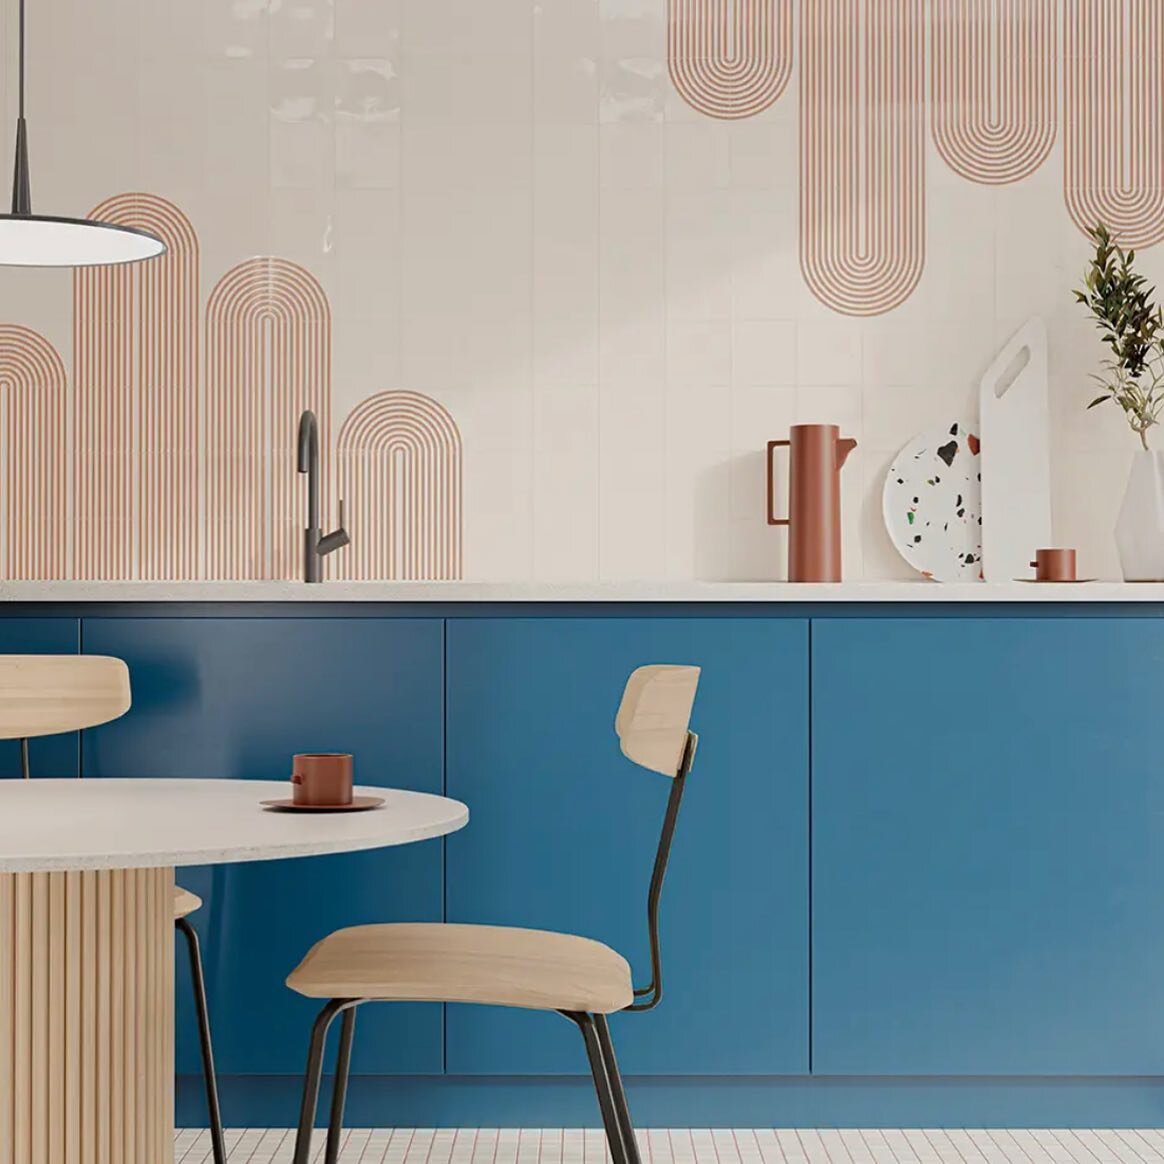 Having fun with TWISTER! WOW has a new line called Twister and we have had some fun collaborating with our clients. Check it out and more in our latest September Tile Stories - Linktree in our Bio.